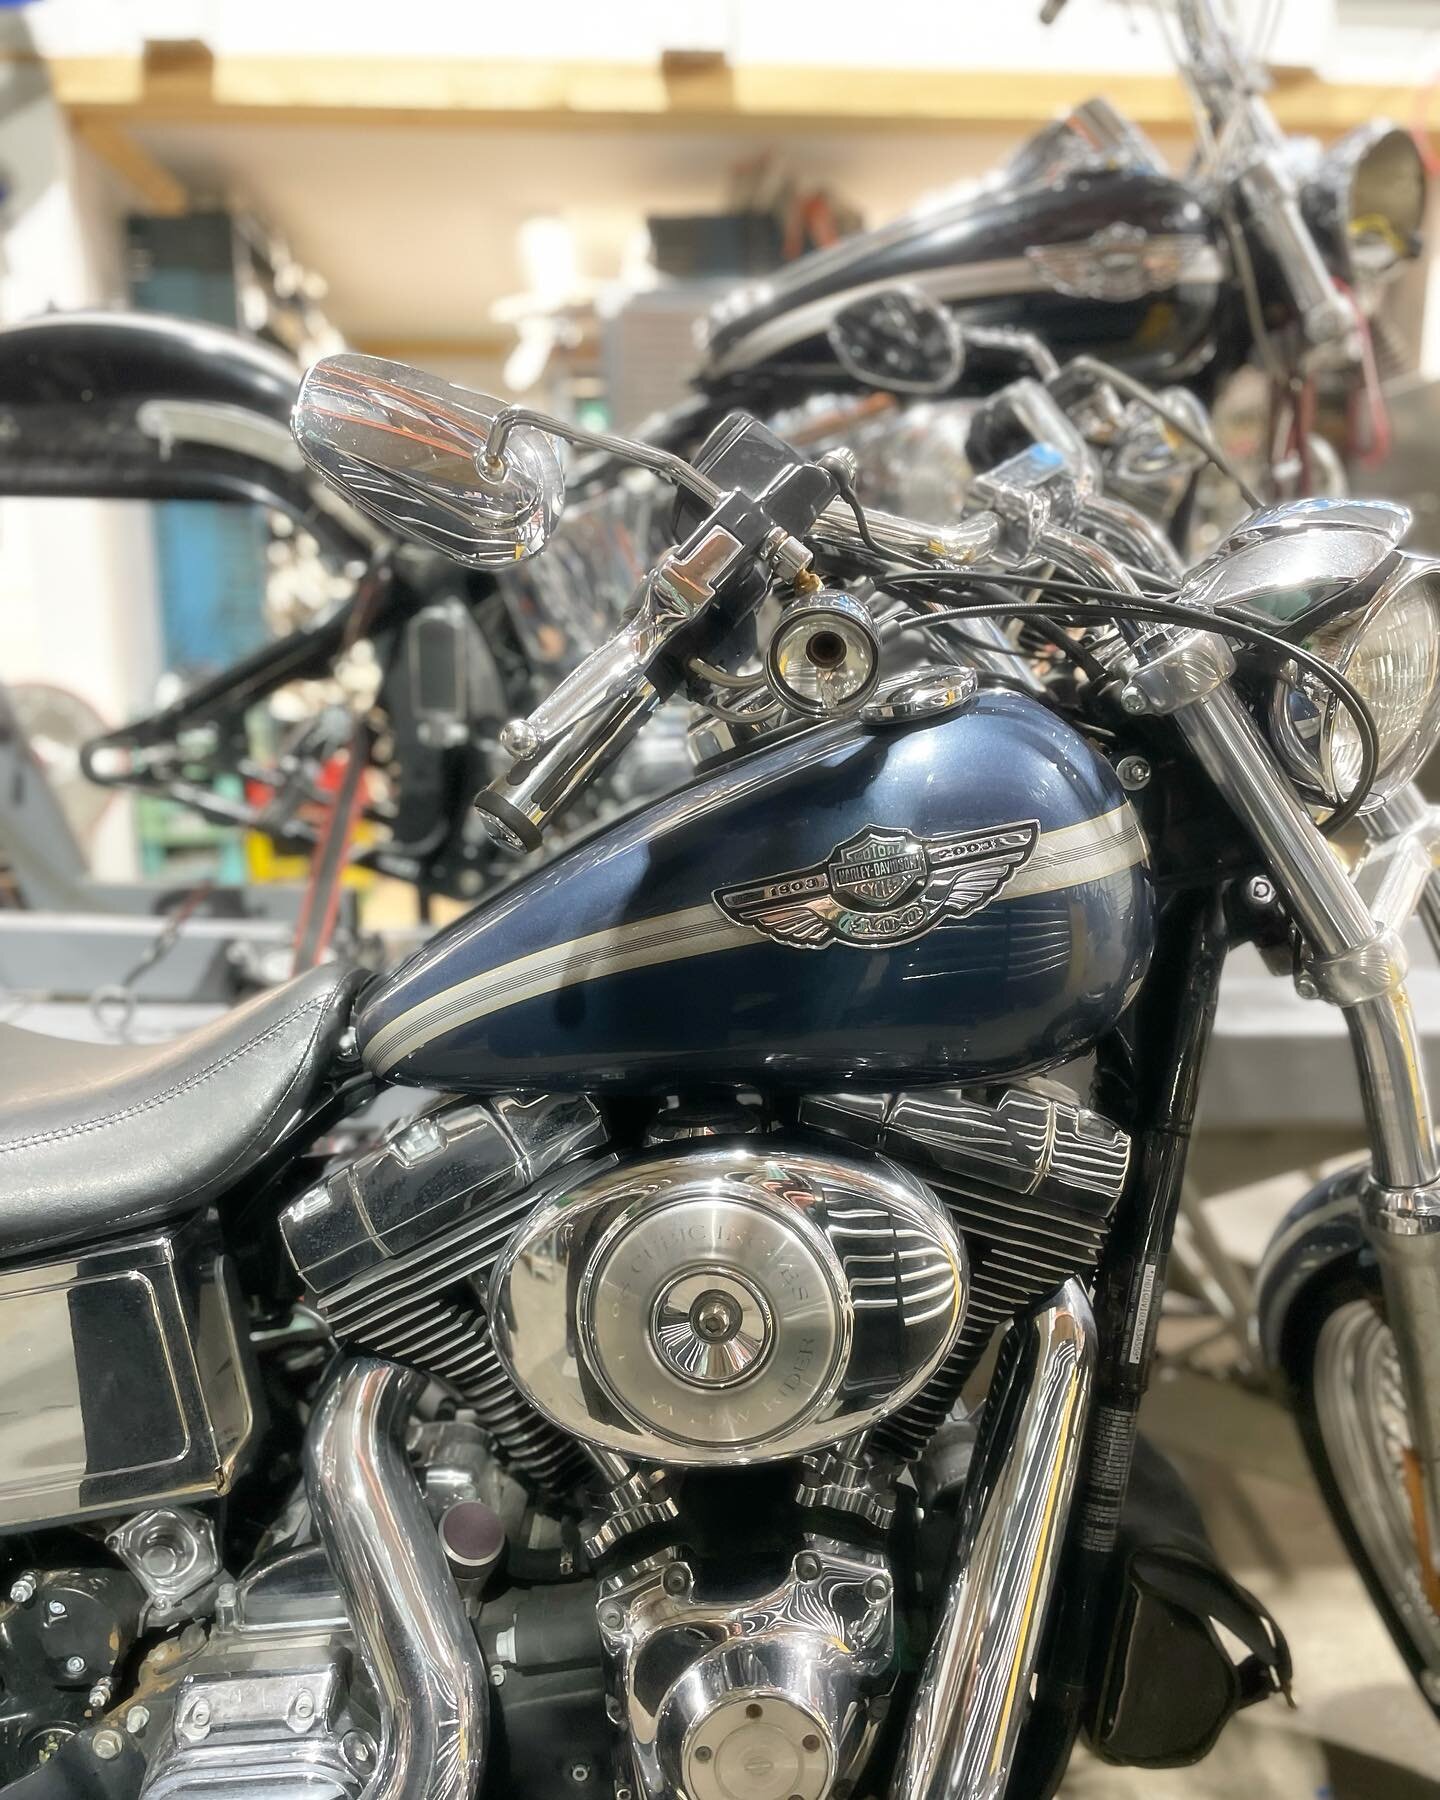 Tons of 100th Anniversary Edition Harley parts for sale on our eBay store! Vivid Black Softail Deuce on the lift and a Gunmetal Pearl Dyna Low Rider up front. #motorcyclesalvage #harleydyna #harleydynalowrider #softaildeuce #harleysoftail #fxdl #fxst